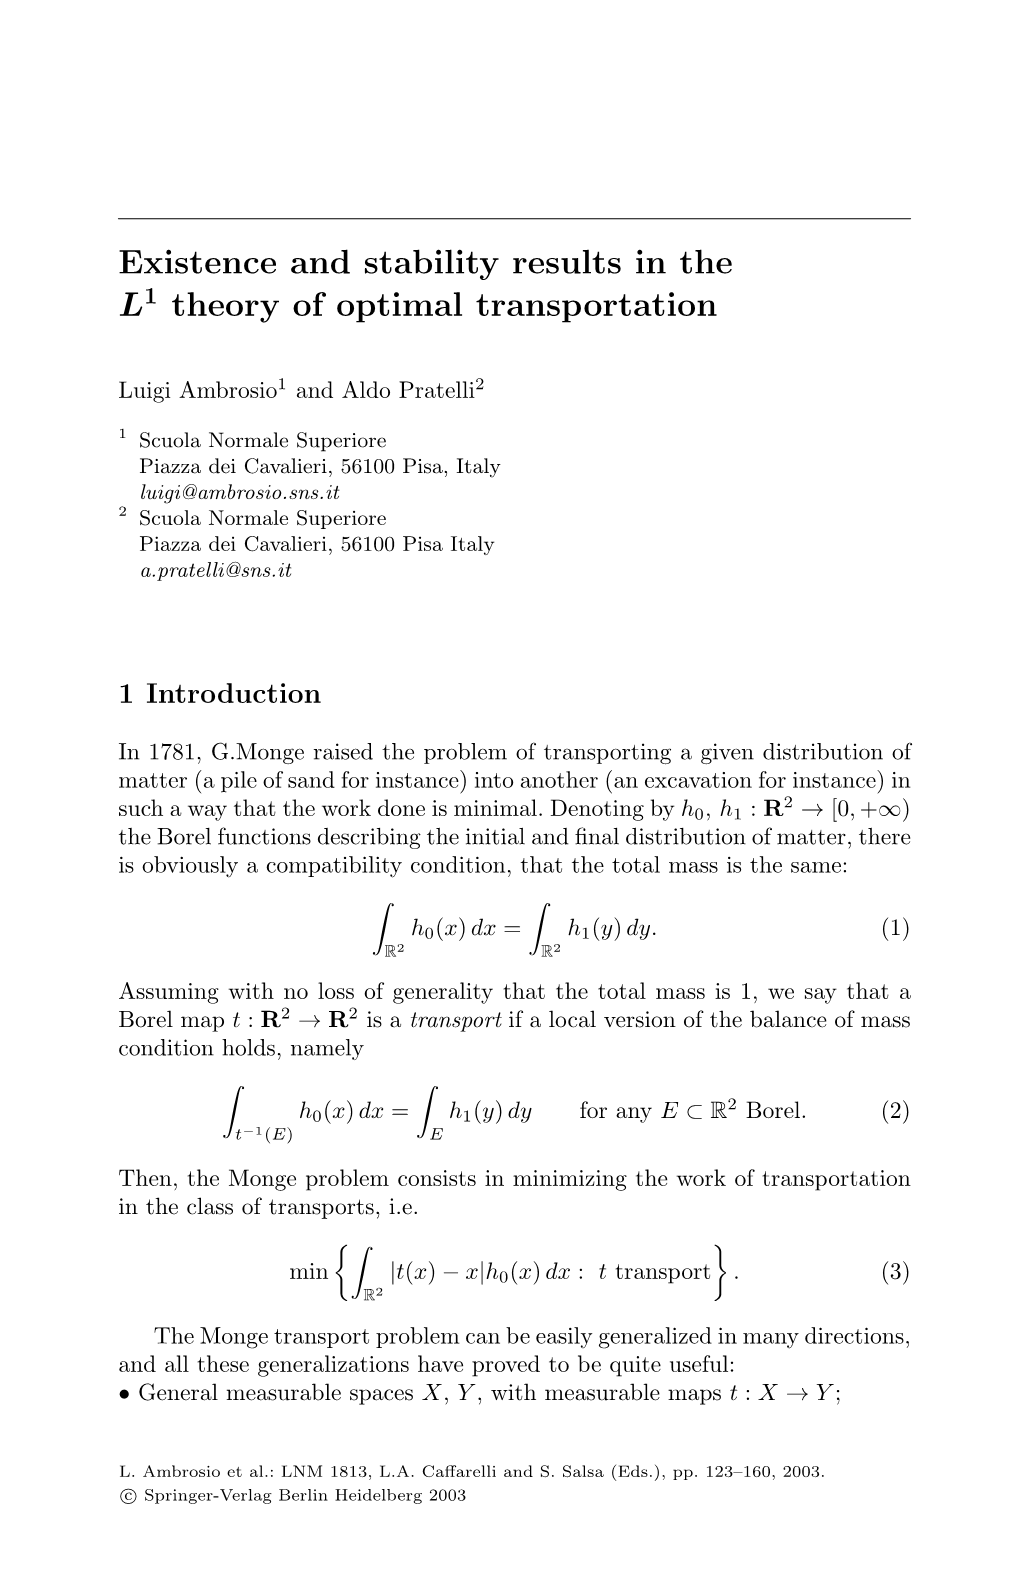 Existence and Stability Results in the L1 Theory of Optimal Transportation